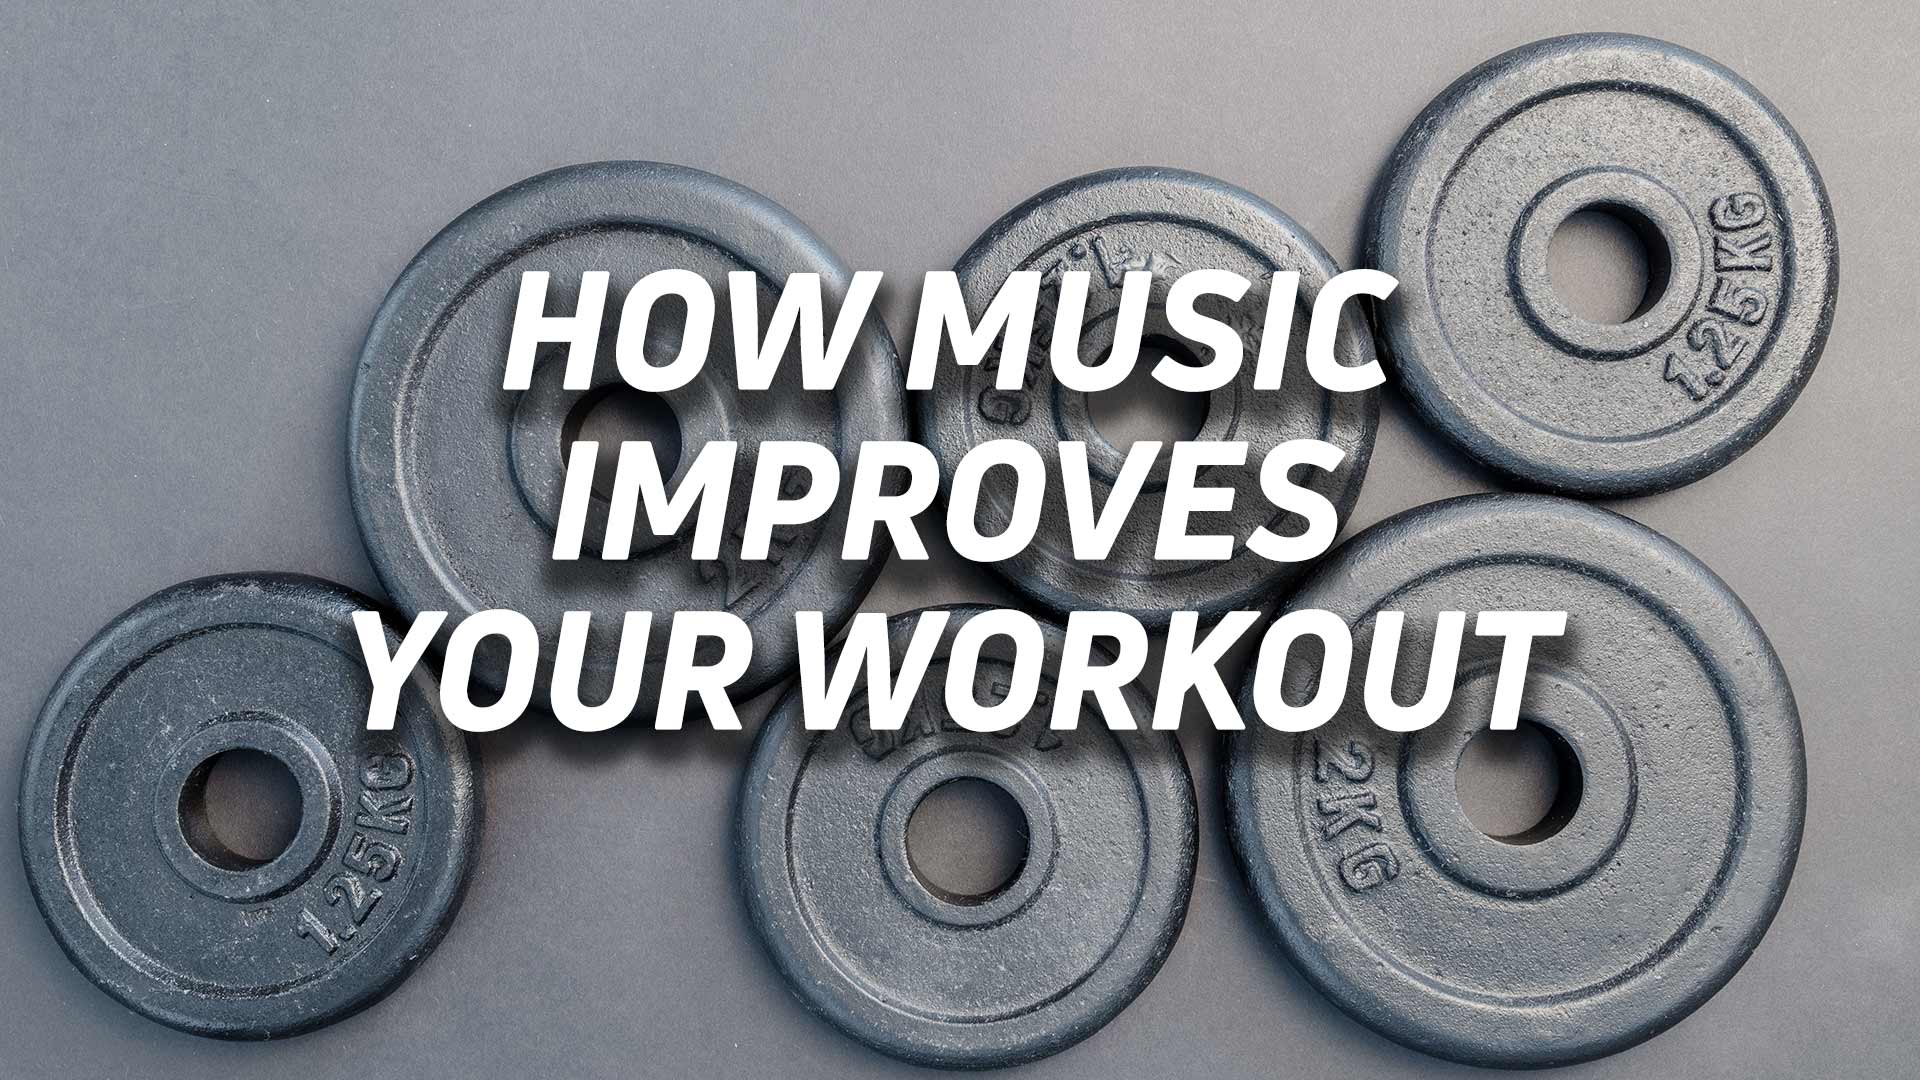 Aerial view of free weights with the text "how music improves your workout" overlaid.